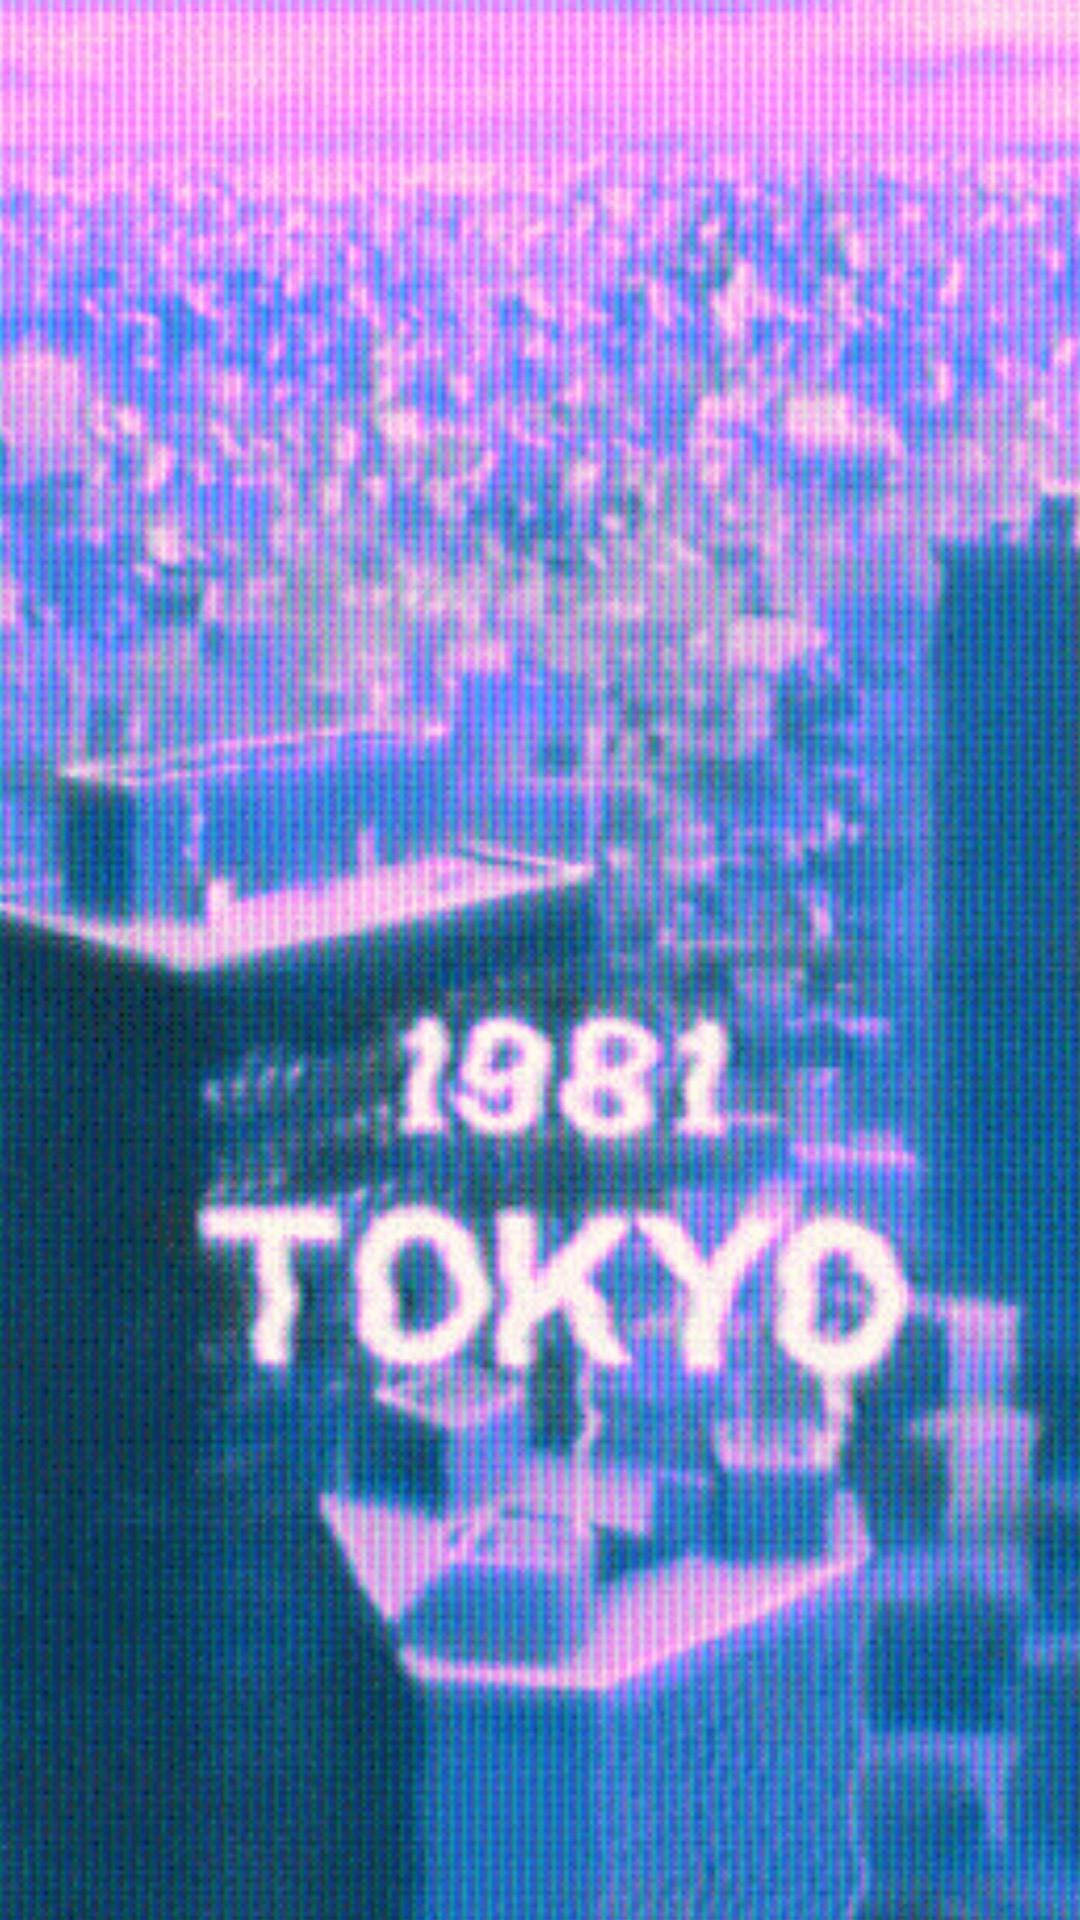 Aesthetic Pink Iphone 1981 Tokyo Background